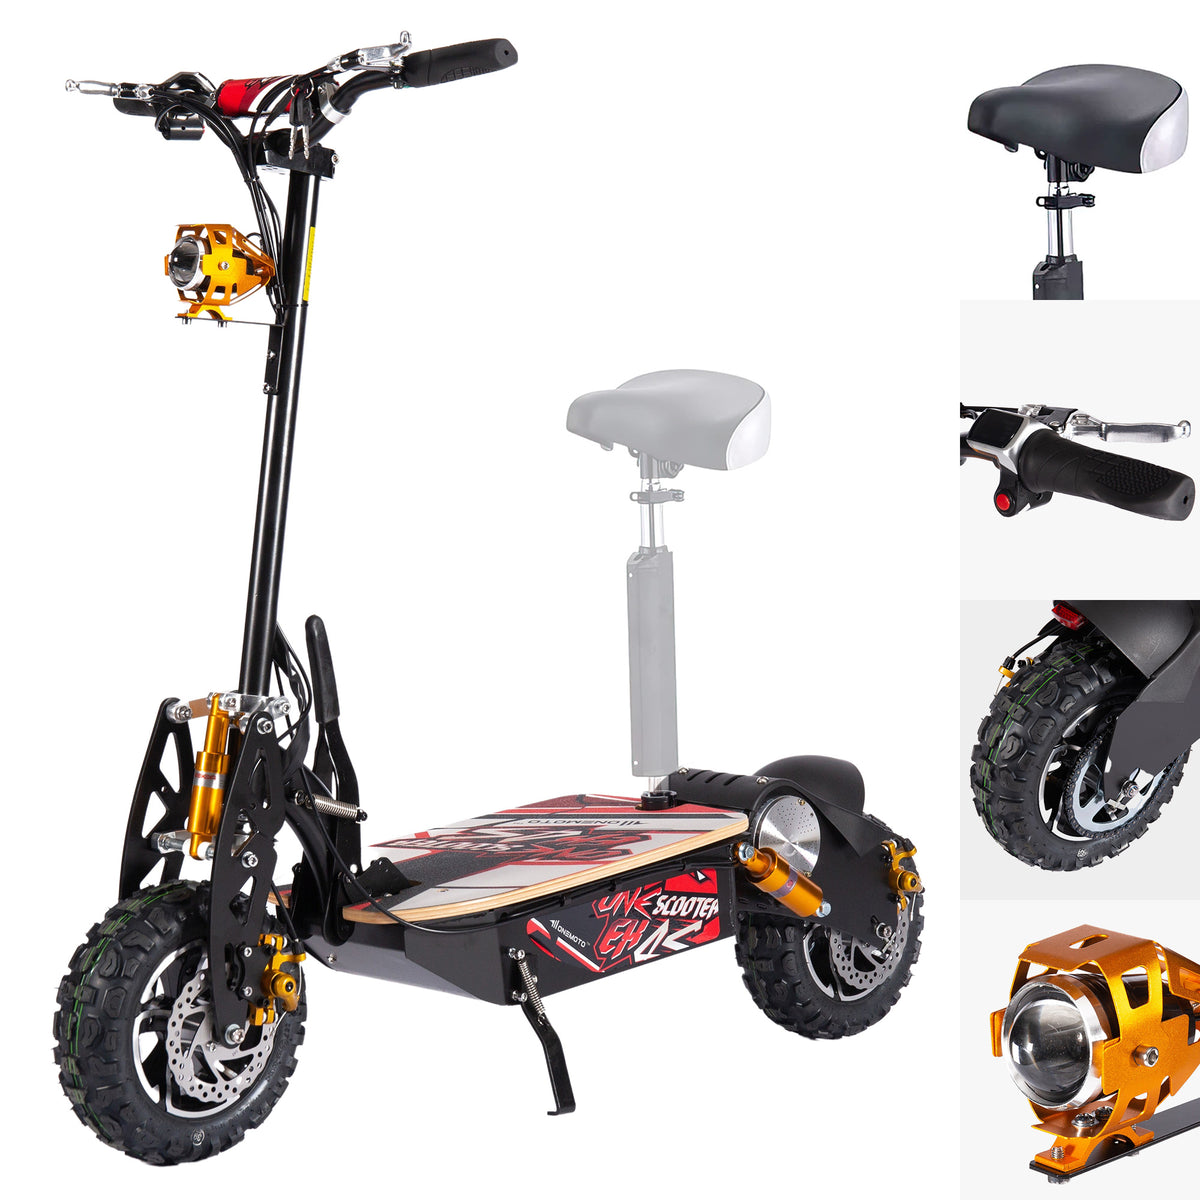 MonsterBike Off-Road 1600W Brushless